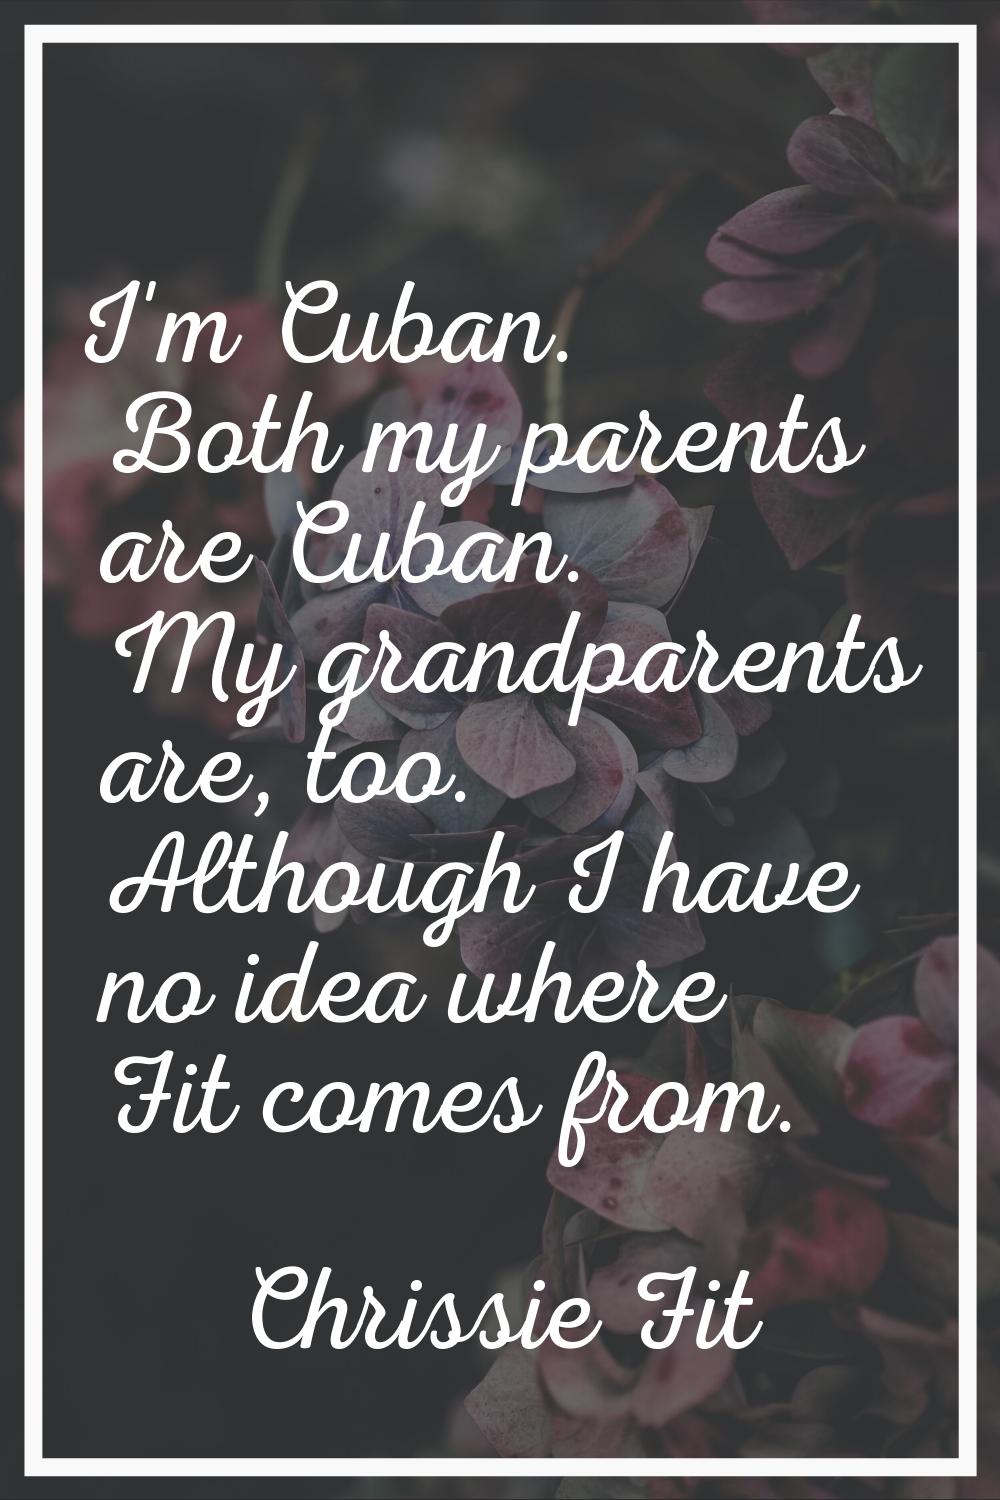 I'm Cuban. Both my parents are Cuban. My grandparents are, too. Although I have no idea where Fit c